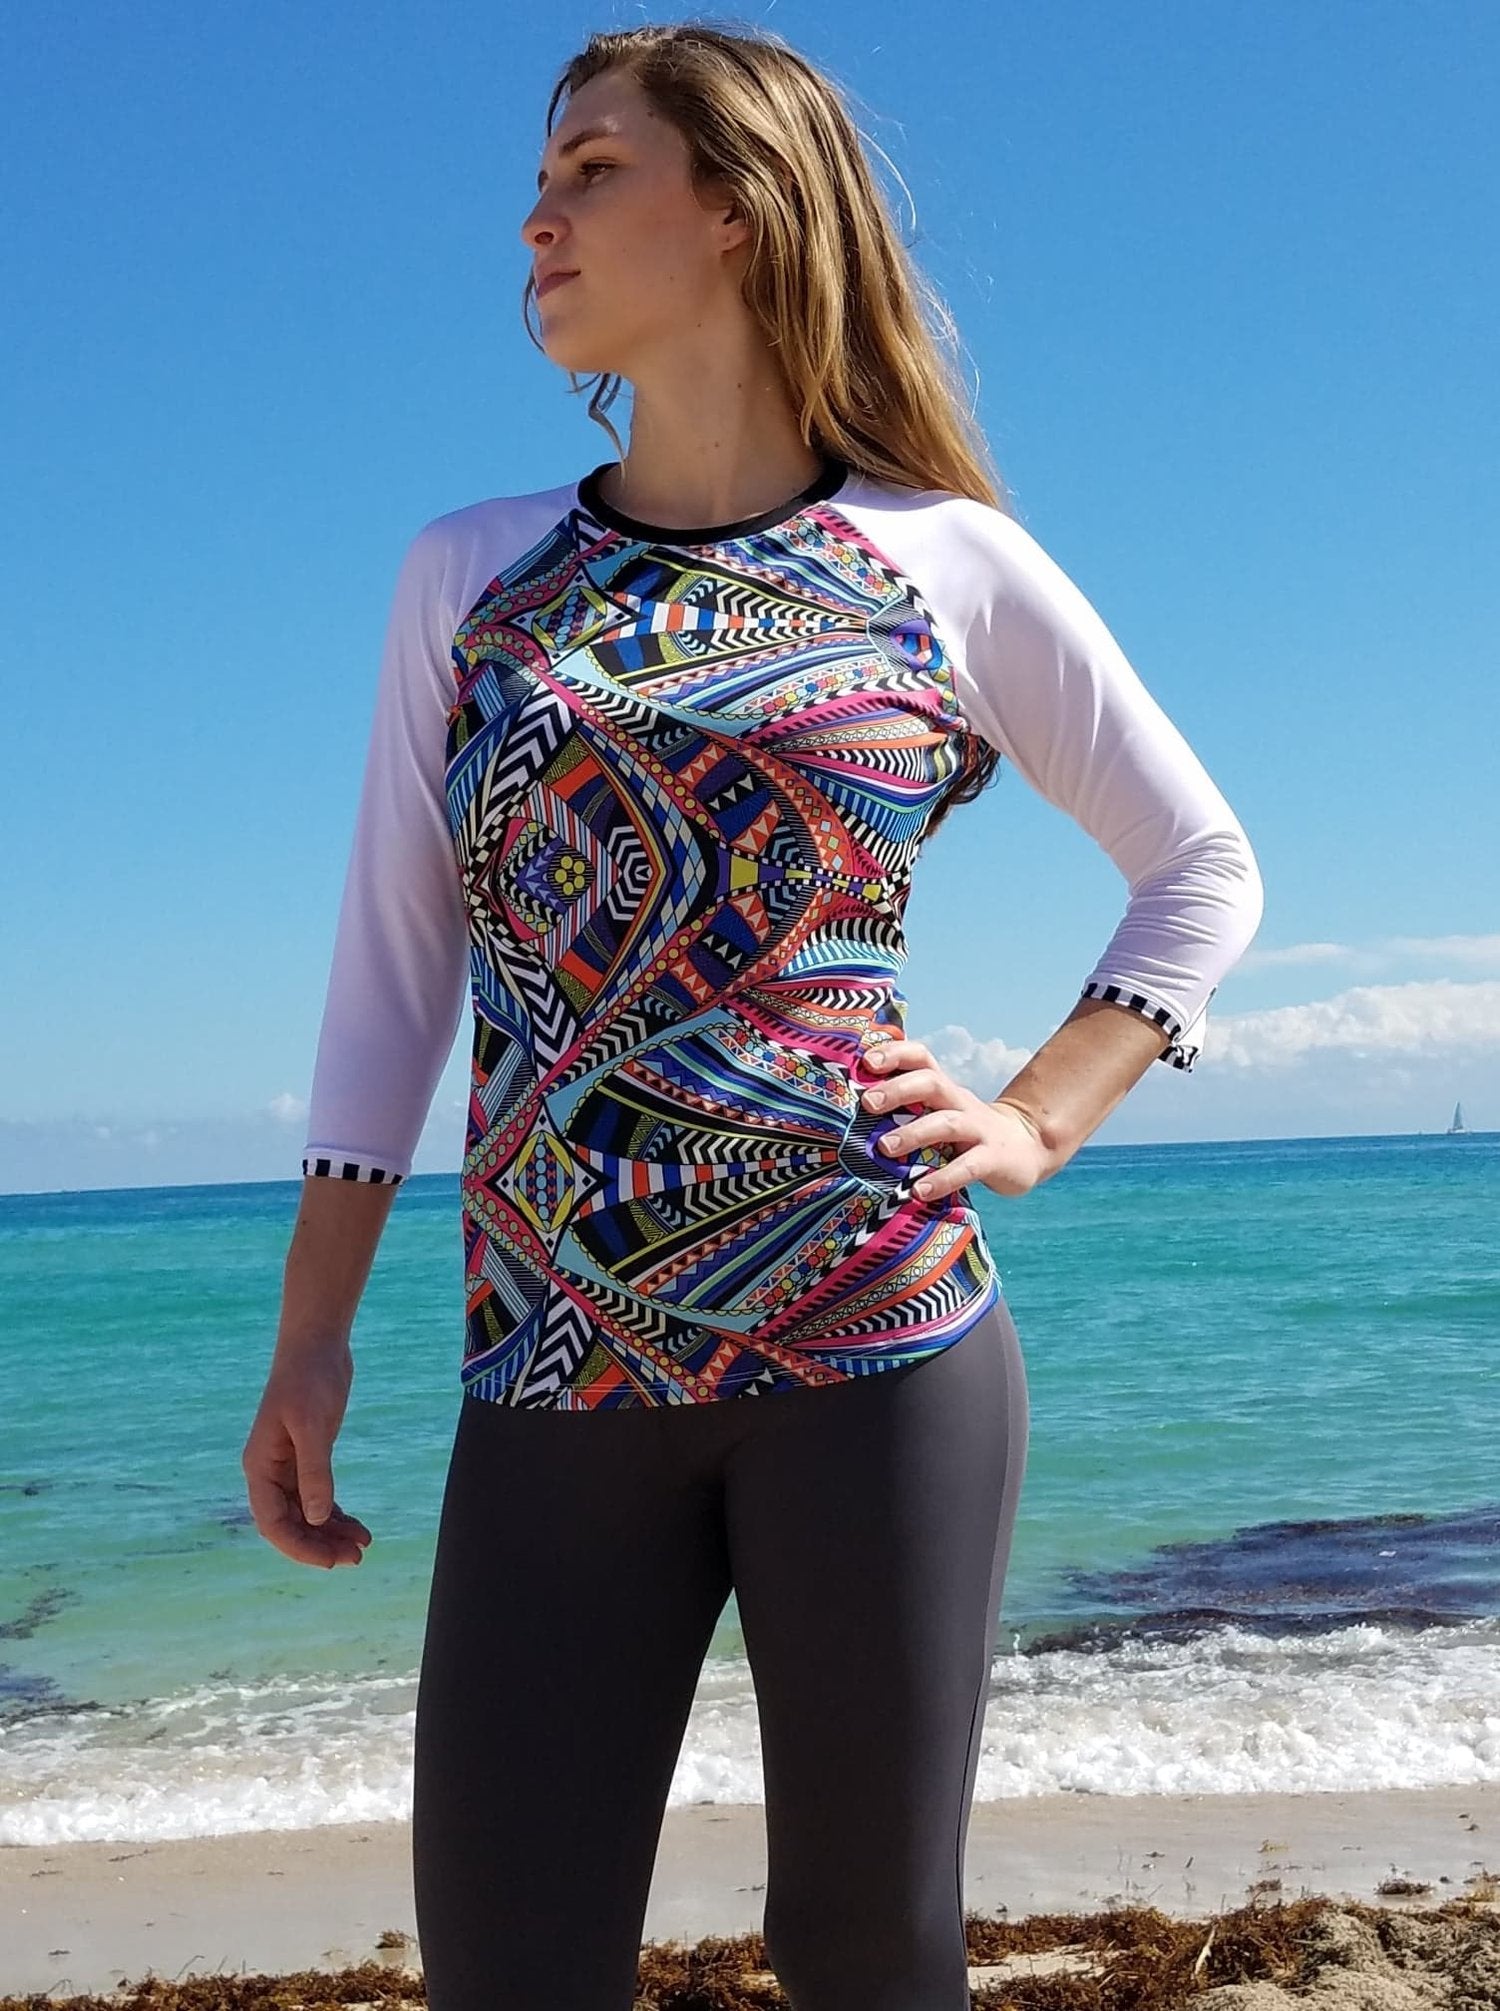 Women's modest long sleeve swim top in colorful print.